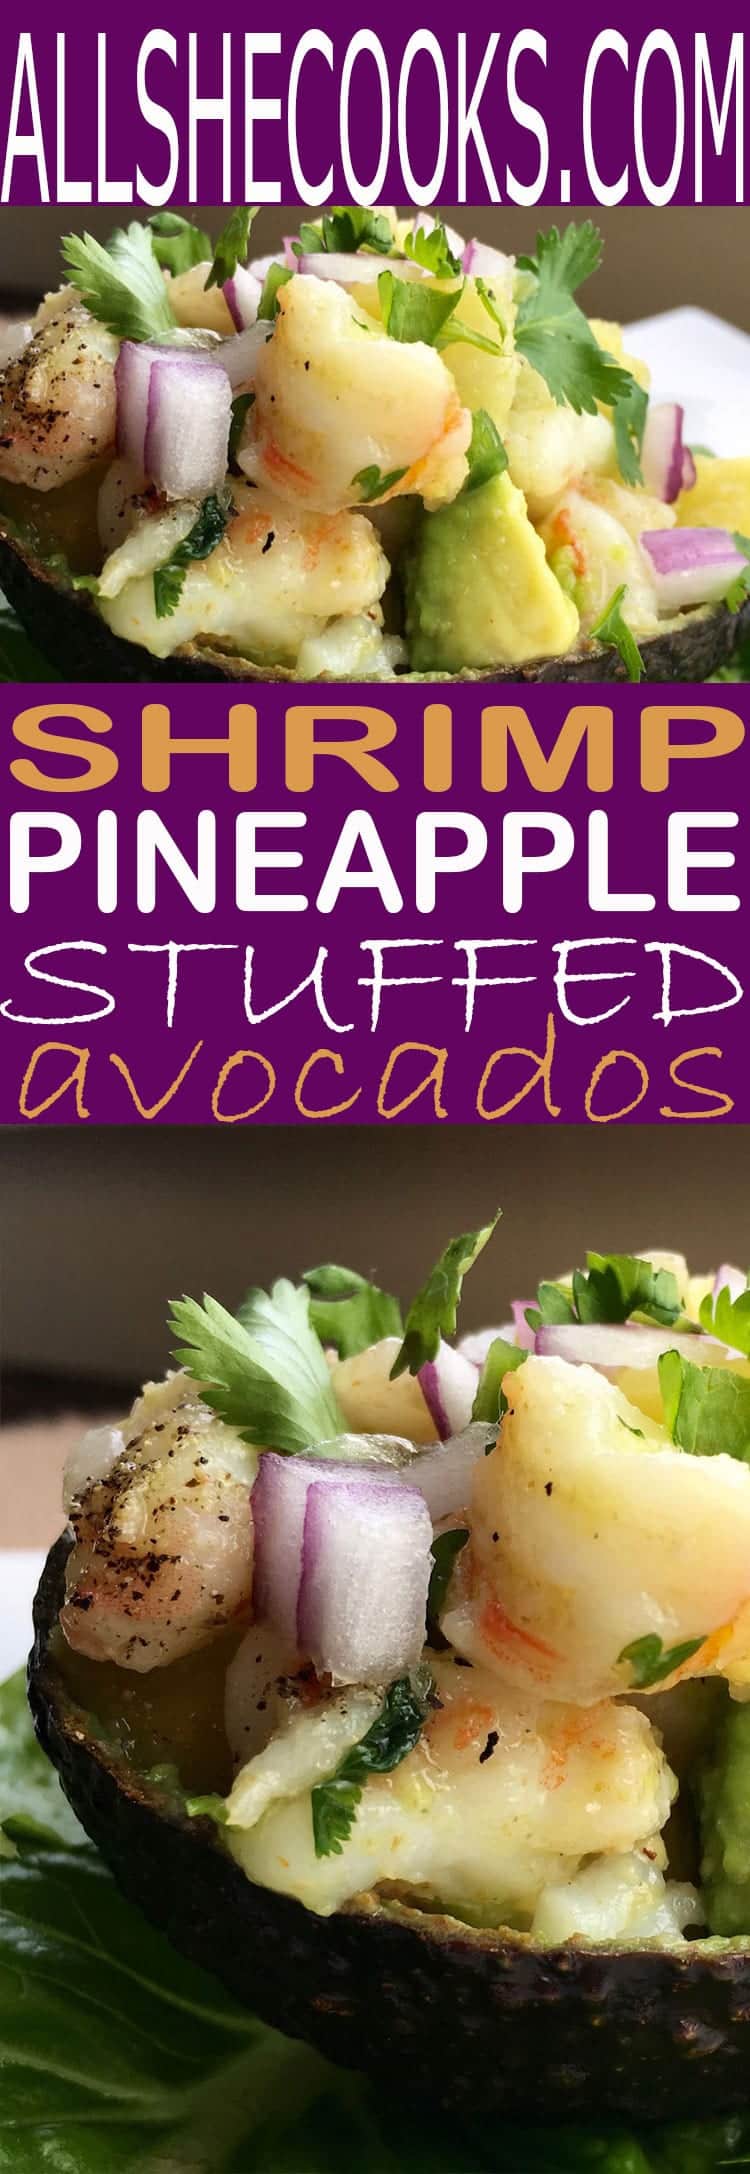 Stuffed avocado recipe with avocado and pineapple. Easy and healthy recipe perfect for an easy dinner this summer.